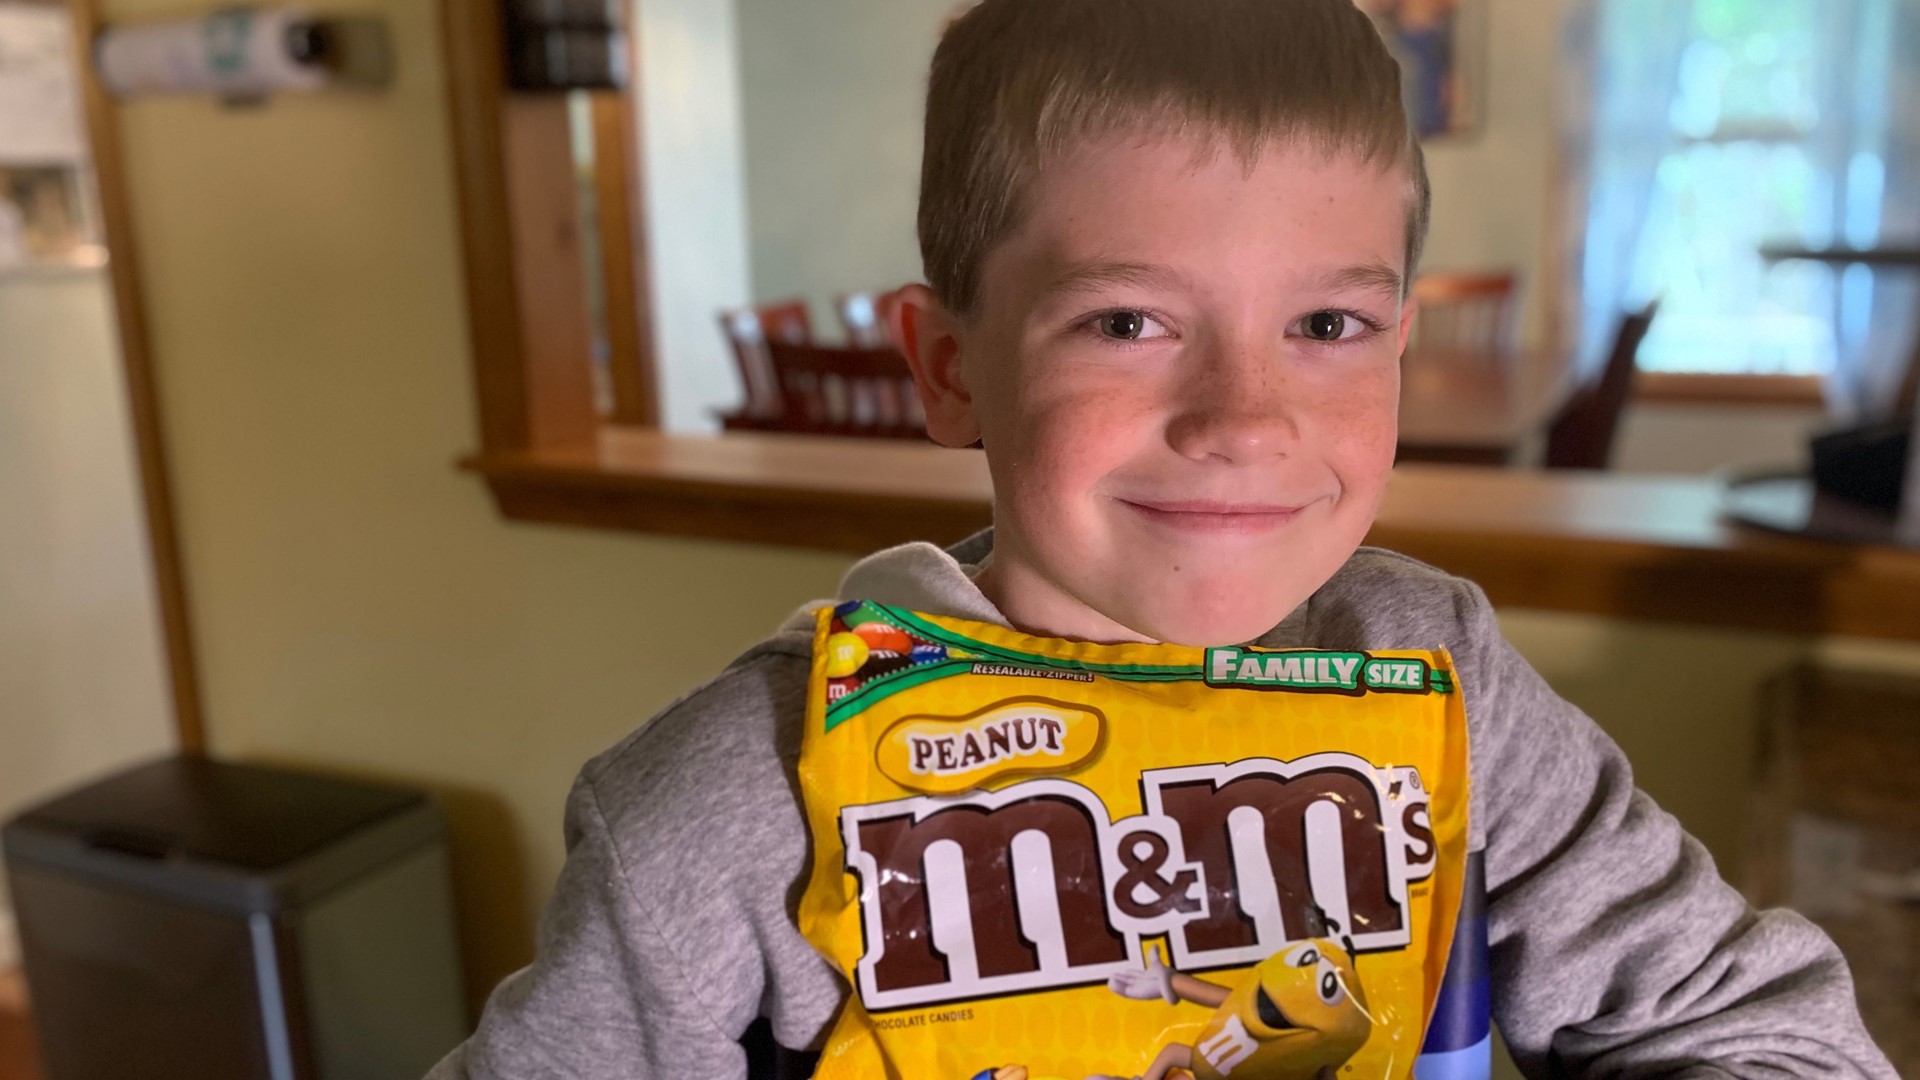 For young kids like Cole Labore oral immunology therapy is helping them desensitize their allergy. Cole is allergic to peanuts and now eats them everyday to stave off a reaction.